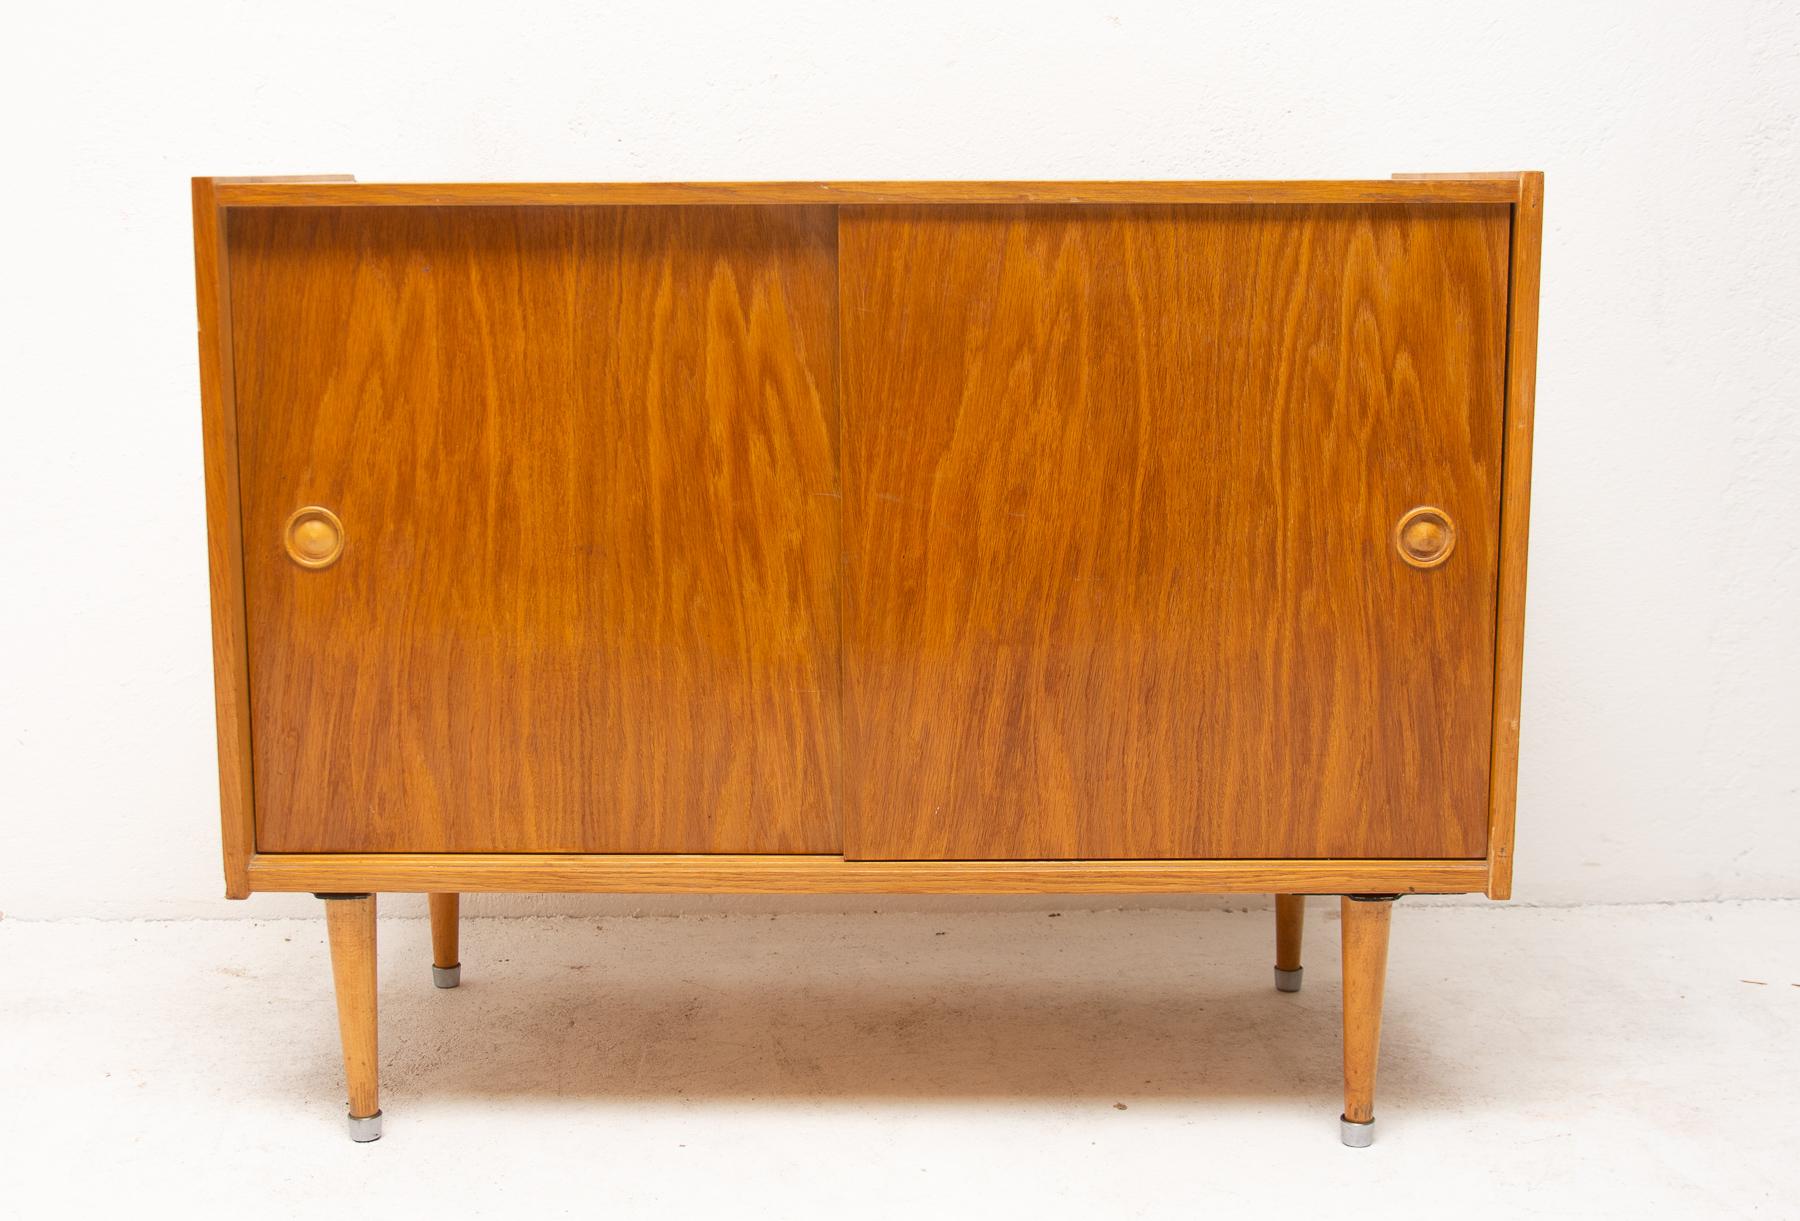 Midcentury sideboard or chest of drawers. It features a sliding doors. It´s made of wood and plywood, veneered in a polished oak wood. It was produced by Zapadoslovenske Nabytkarske Zavody, a furniture company in Czechoslovakia in 1960s. In very